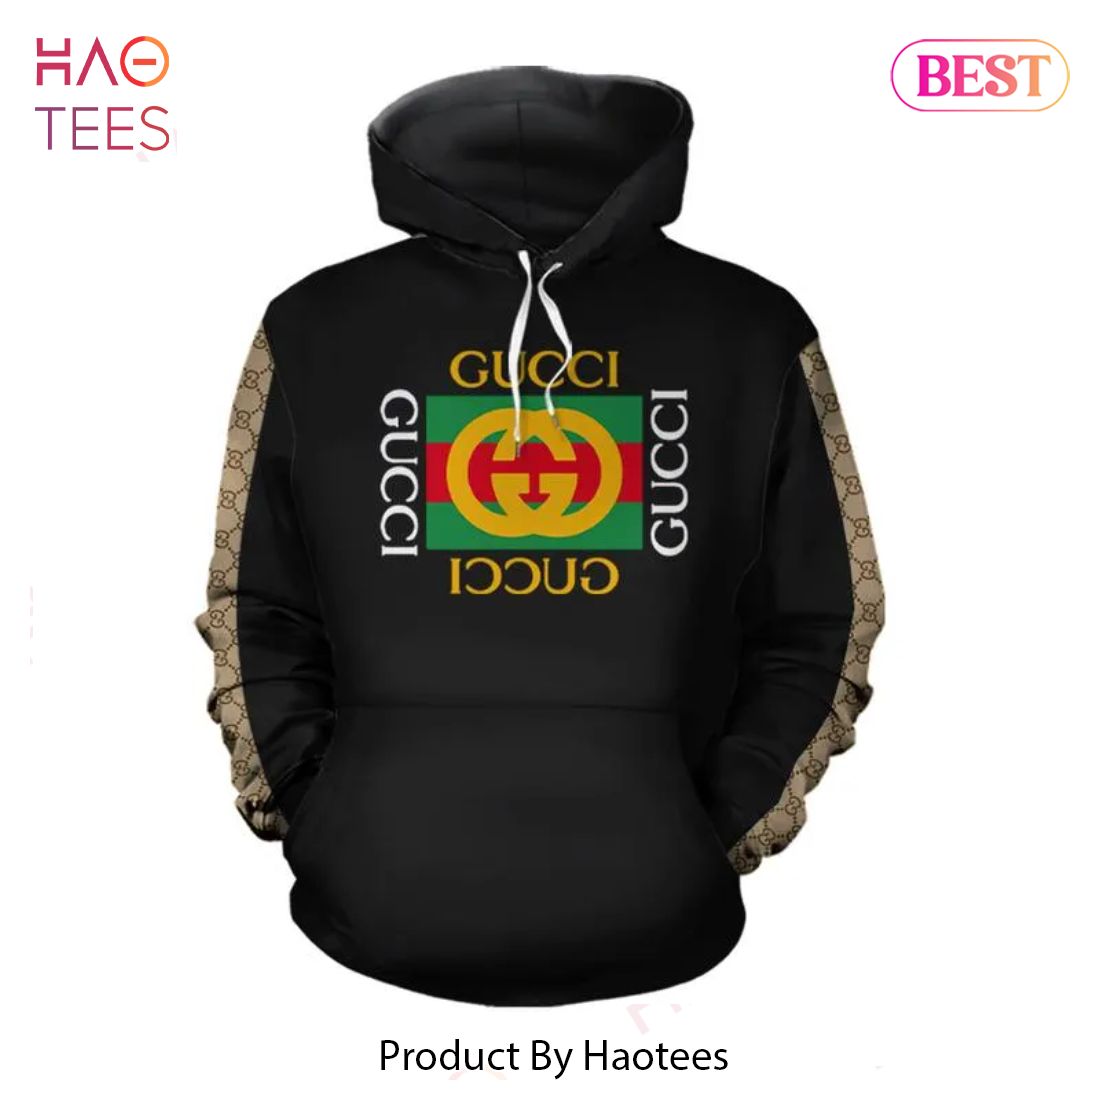 Gucci Black Unisex Hoodie For Men Women Luxury Brand Clothes Outfit